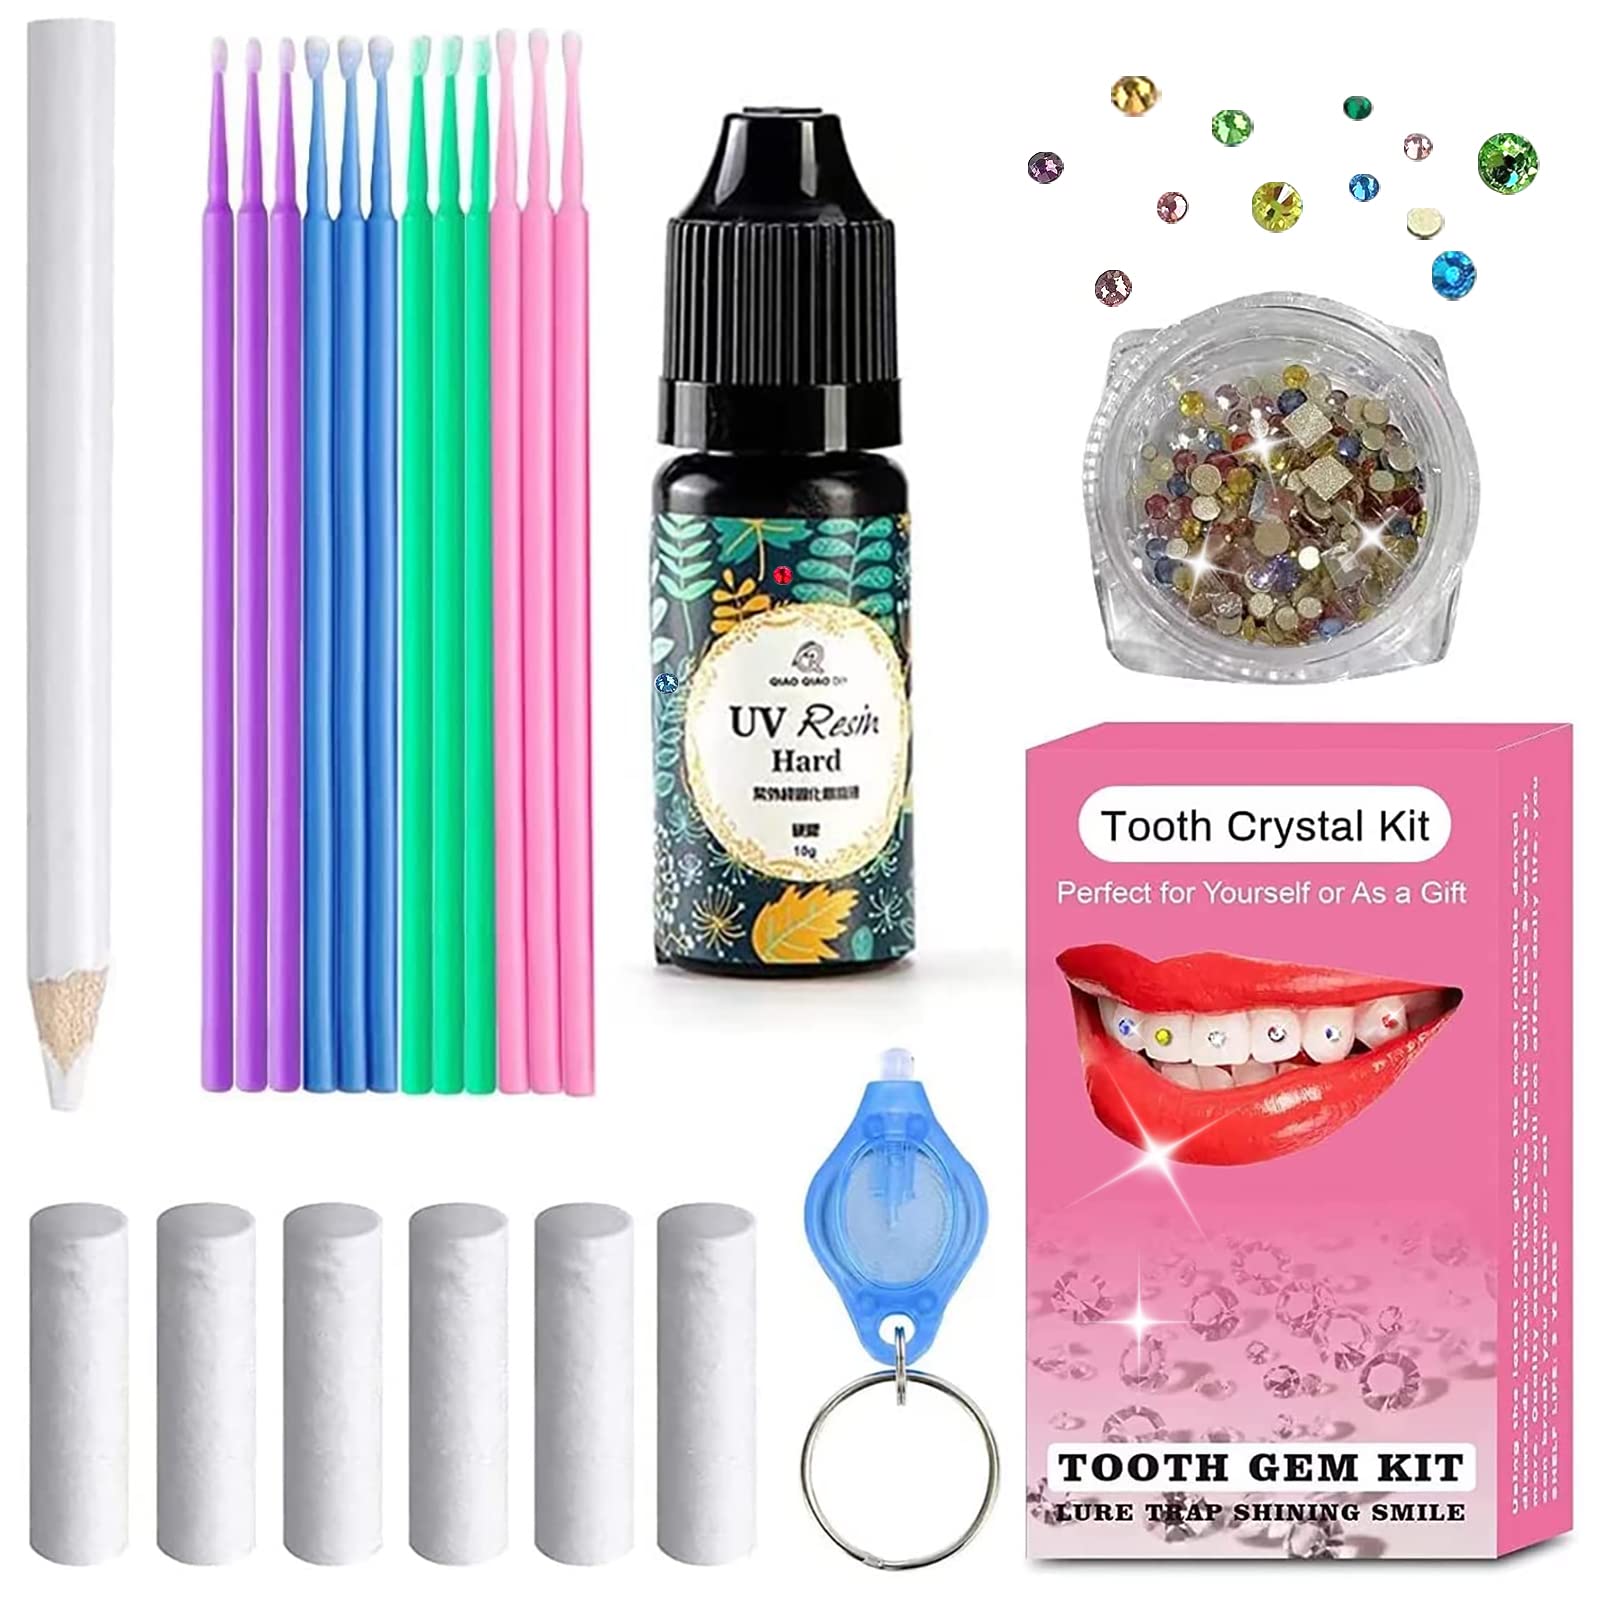 WEITING Professional DIY Tooth Gem Kit Crystals Jewelry kit, Teeth Gems Kit  with Glue and Crystals, Great Tooth Jewelry Gems Kit for DIY Use